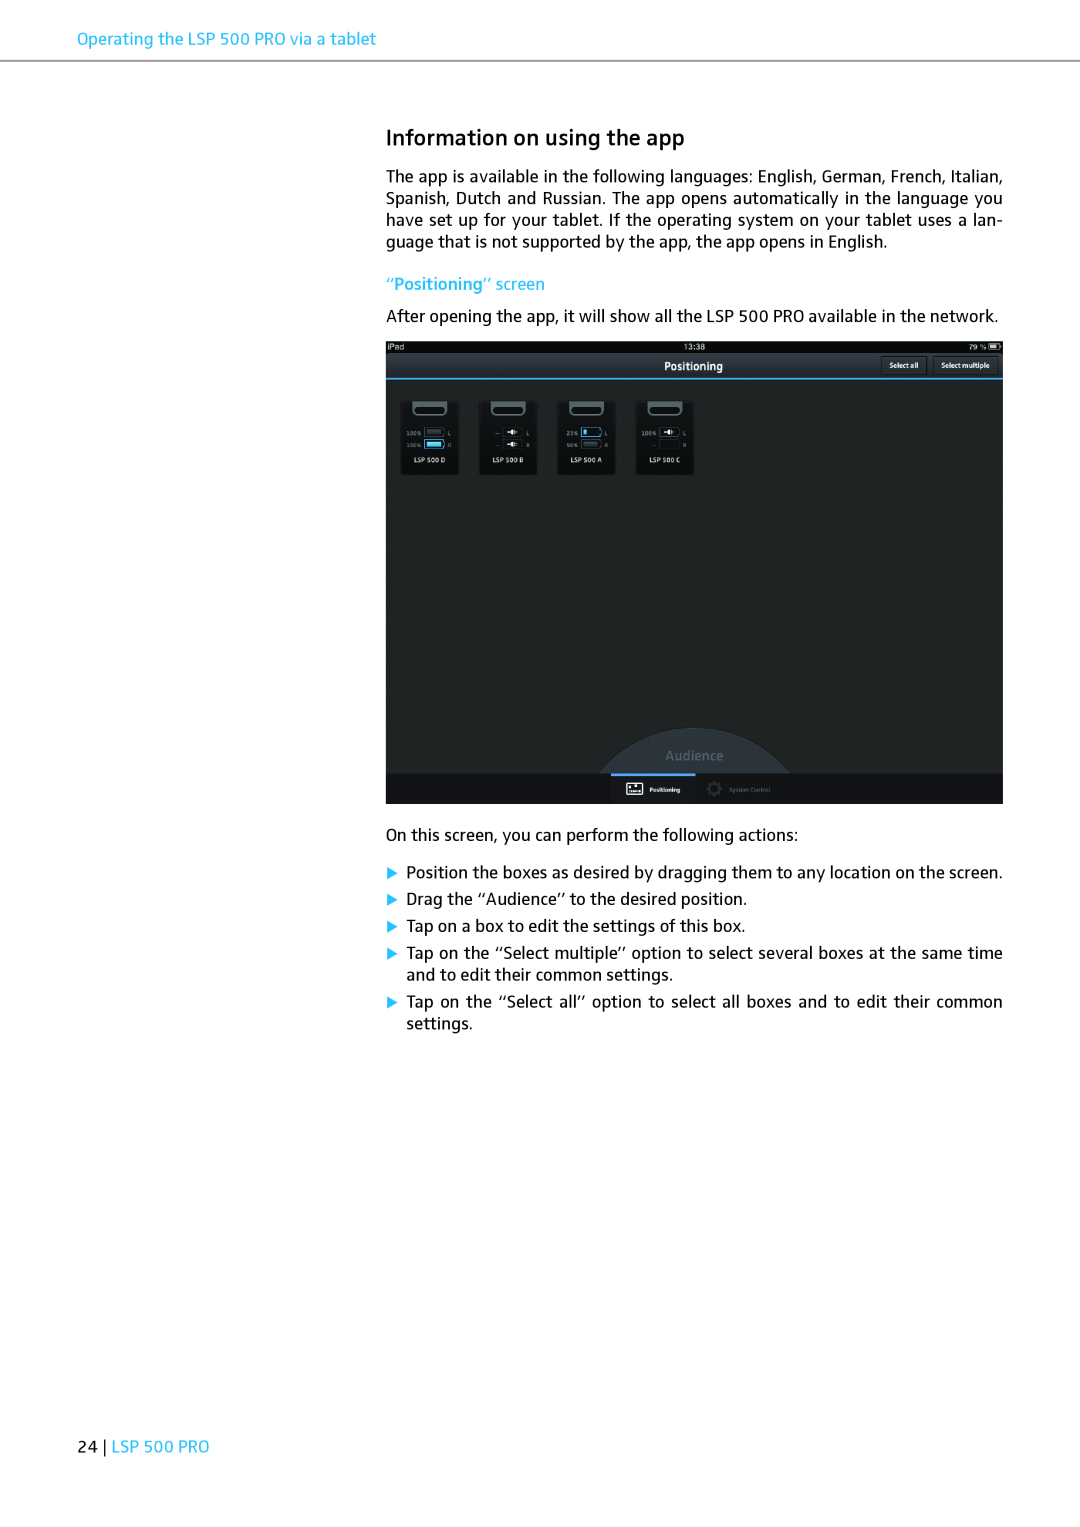 Sennheiser instruction manual Information on using the app, “Positioning” screen, Operating the LSP 500 PRO via a tablet 